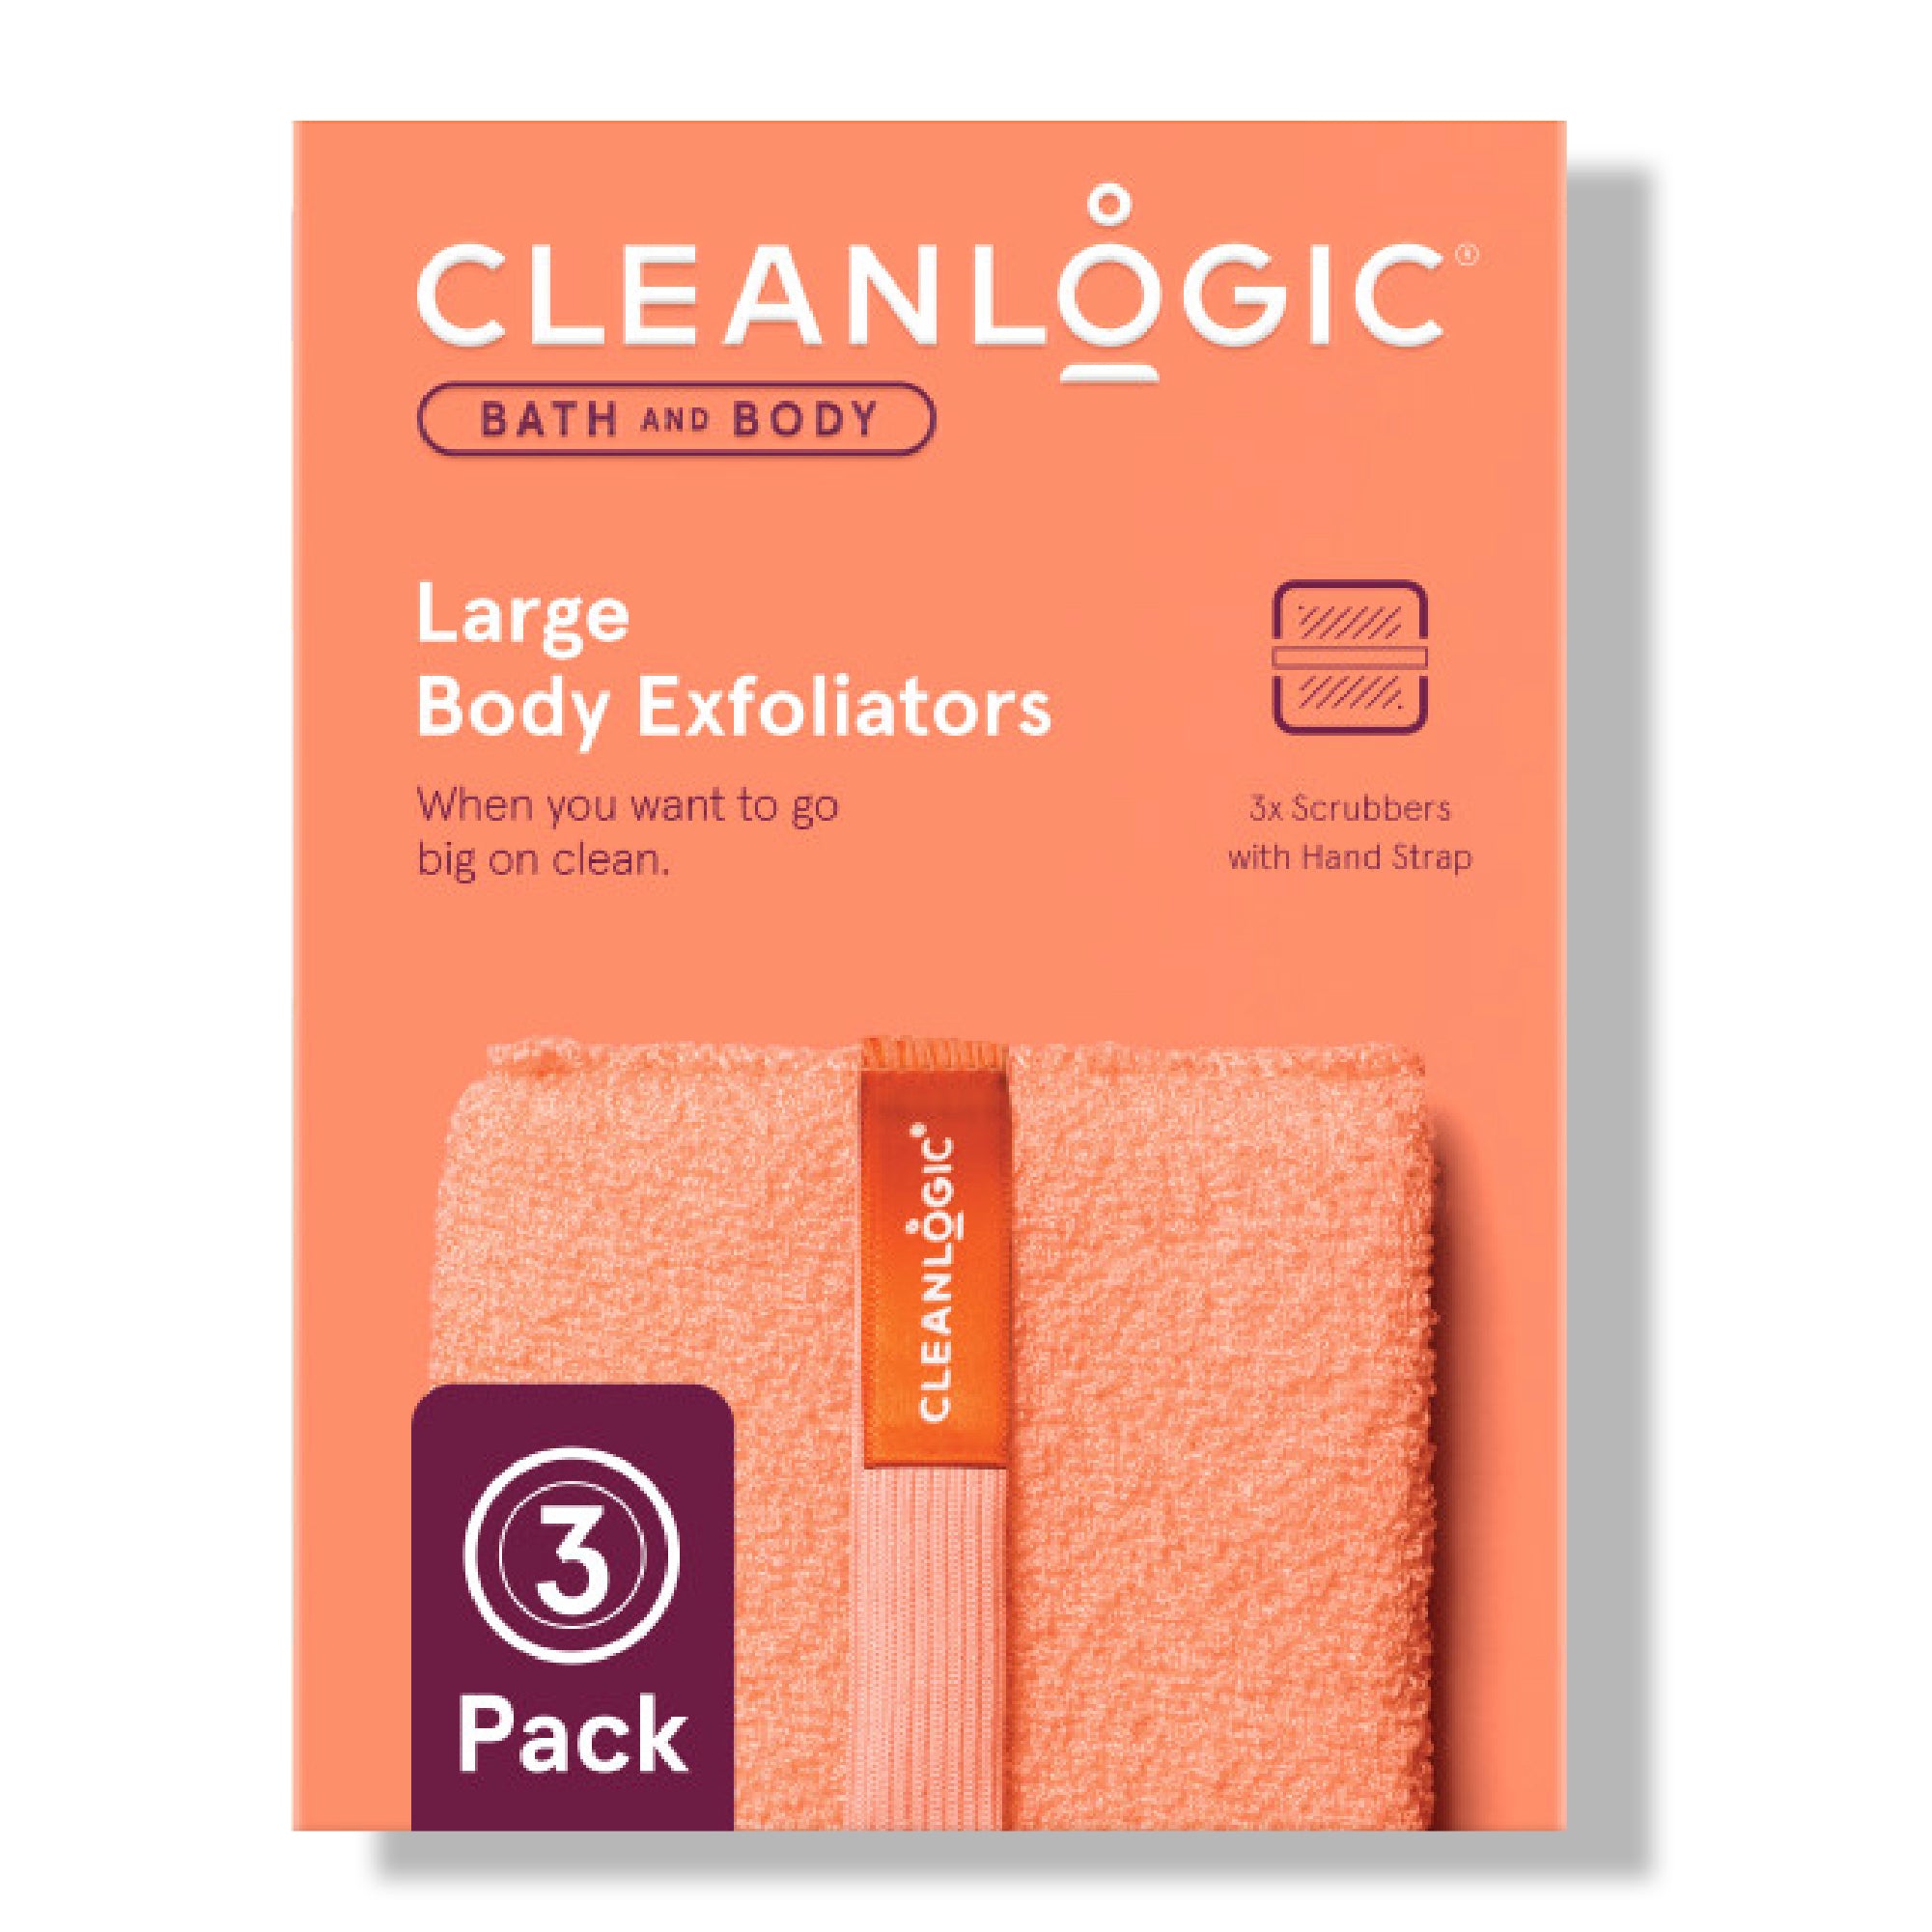 Bath and Body Large Body Exfoliator, Assorted Colors, 3 Count